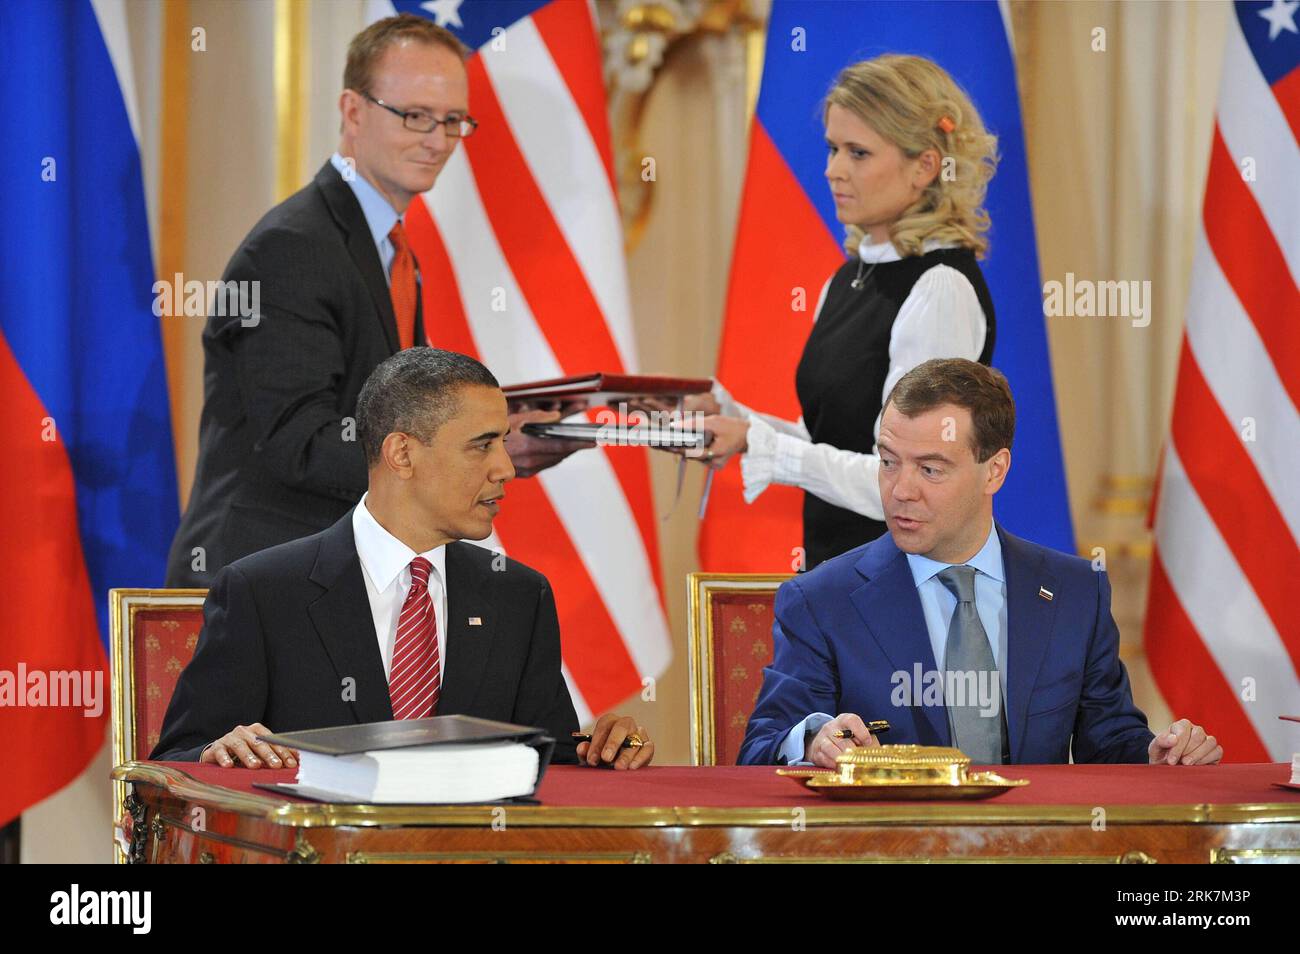 Bildnummer: 53927164  Datum: 08.04.2010  Copyright: imago/Xinhua (100408) -- PRAGUE, April 8, 2010 (Xinhua) -- U.S. President Barack Obama (L) and his Russian counterpart Dmitry Medvedev sign a landmark nuclear arms reduction treaty in Prague, capital of Czech Republic, on April 8, 2010. Under the new pact, the two countries agreed to reduce their deployed nuclear warheads to 1,550 each, or 30 percent below the current level of 2,200, and cut the launchers below 700 each.(Xinhua/Wu Wei) (lyx) (11)CZECH-PRAGUE-RUSSIA-US-TREATY PUBLICATIONxNOTxINxCHN People Politik Prag Abrüstung Abrüstungsgipfe Stock Photo